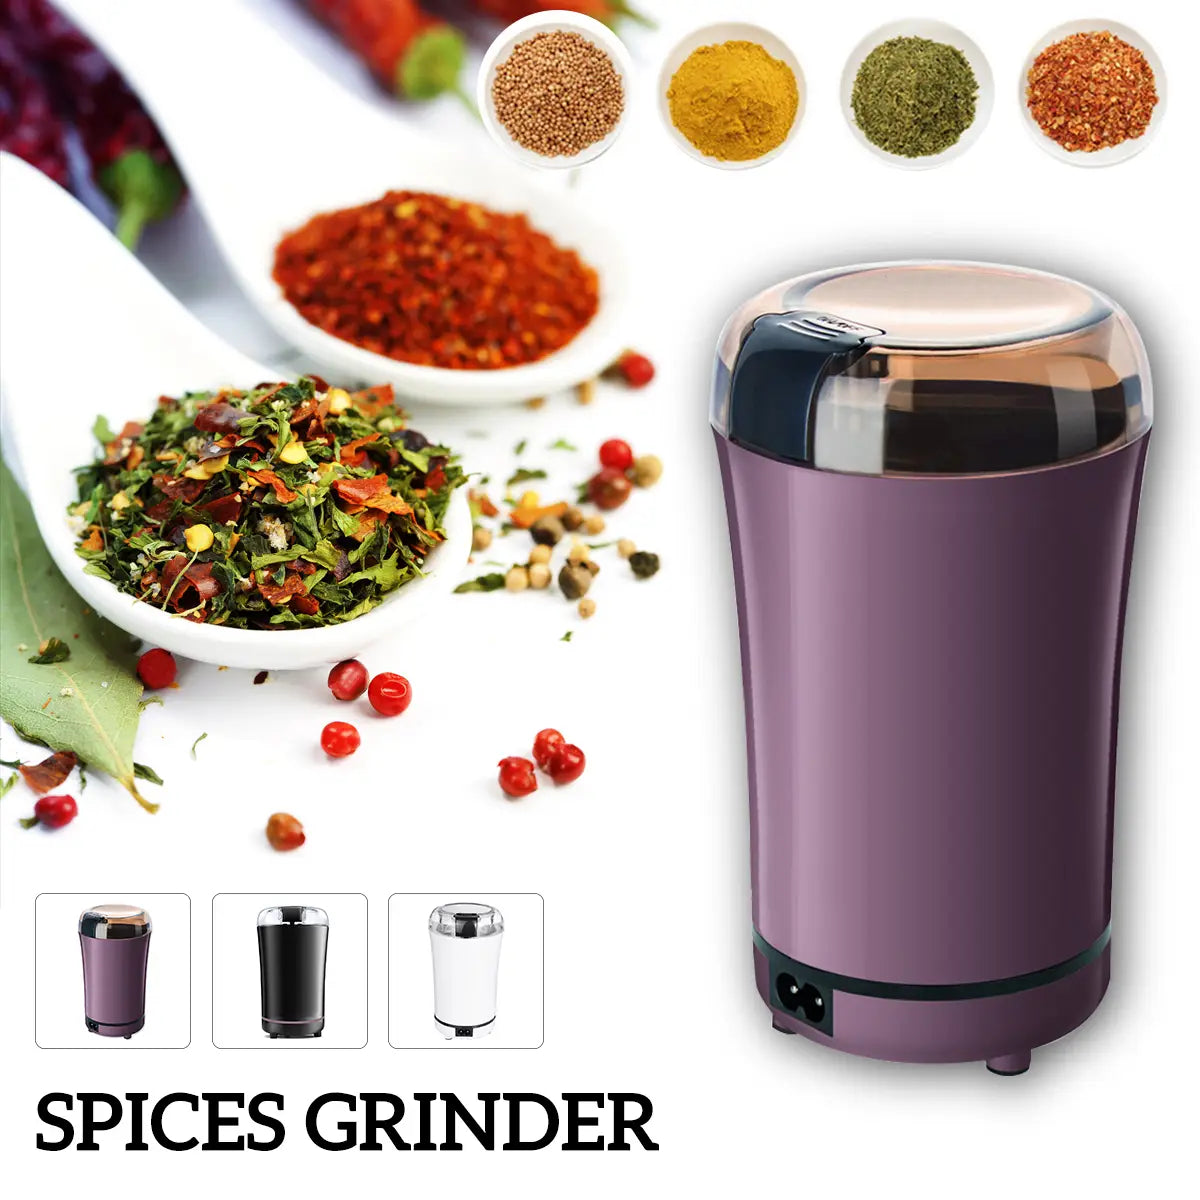 Yunlan M150a Mini Electric Spices Grinder Multifunction